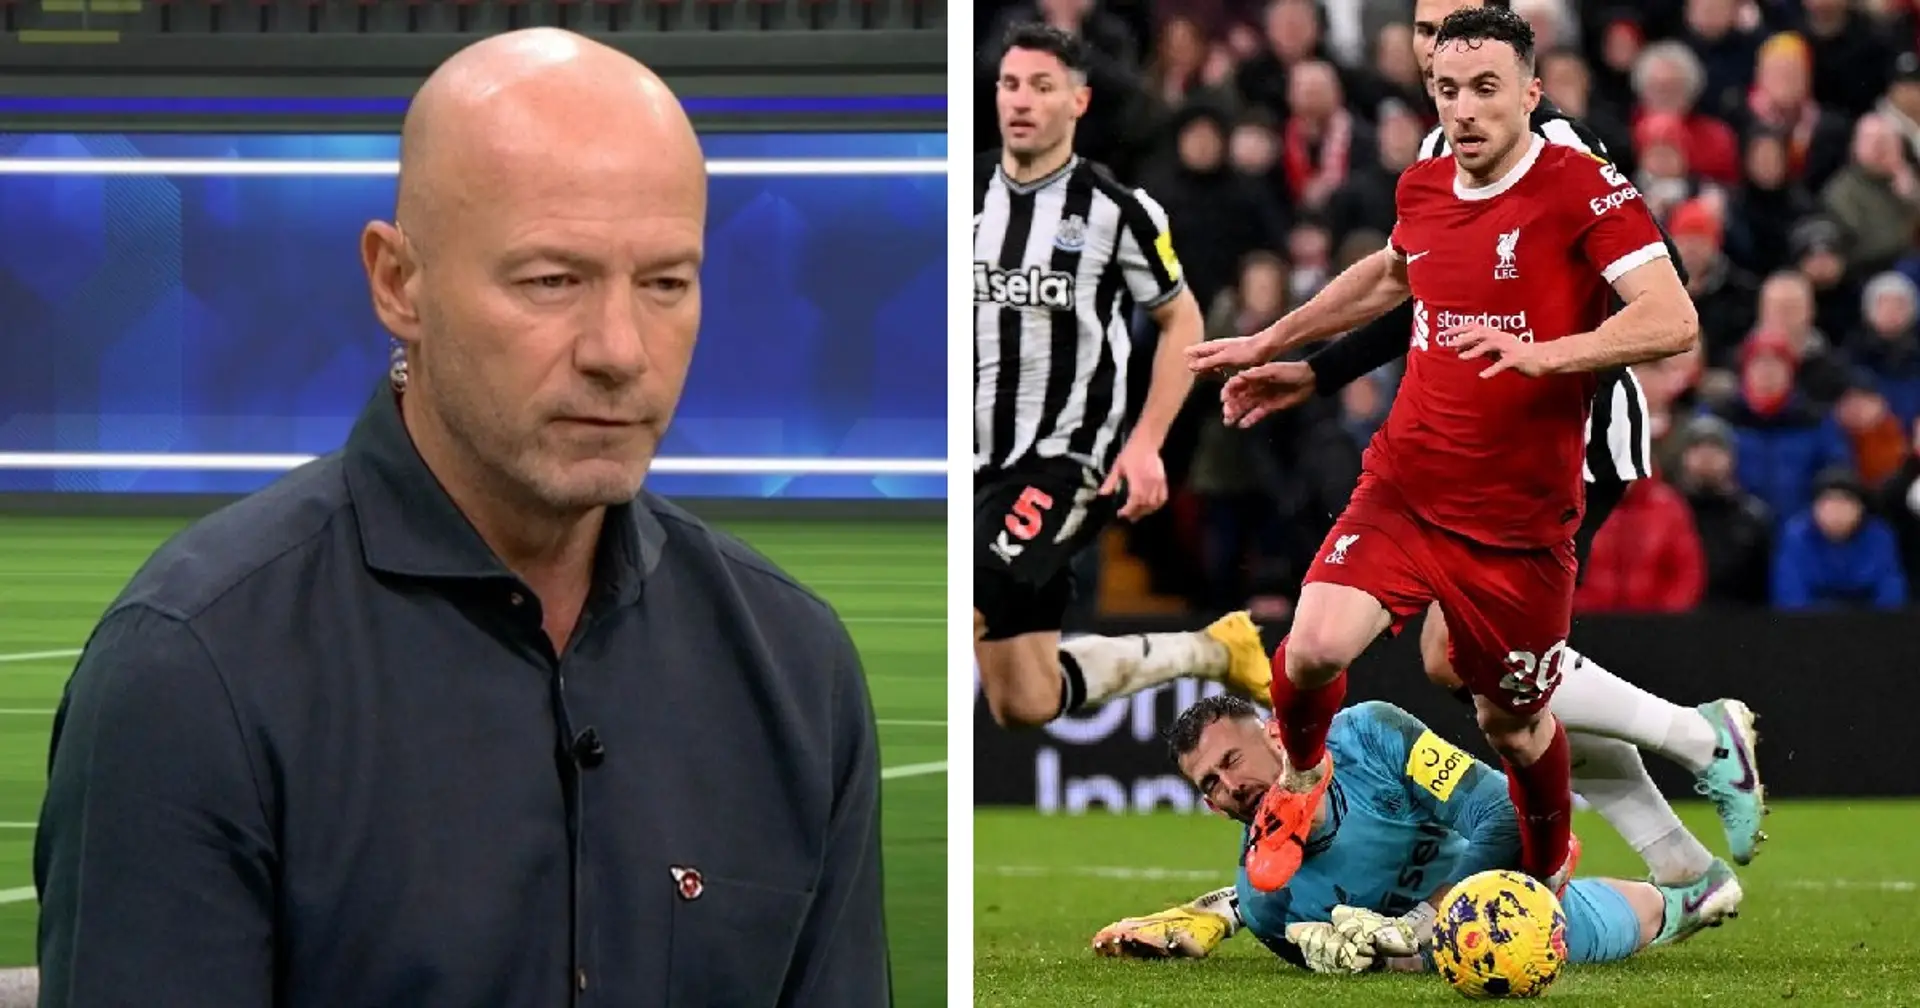 'People who are paid to talk': Jota responds to Alan Shearer's X-rated comment about him